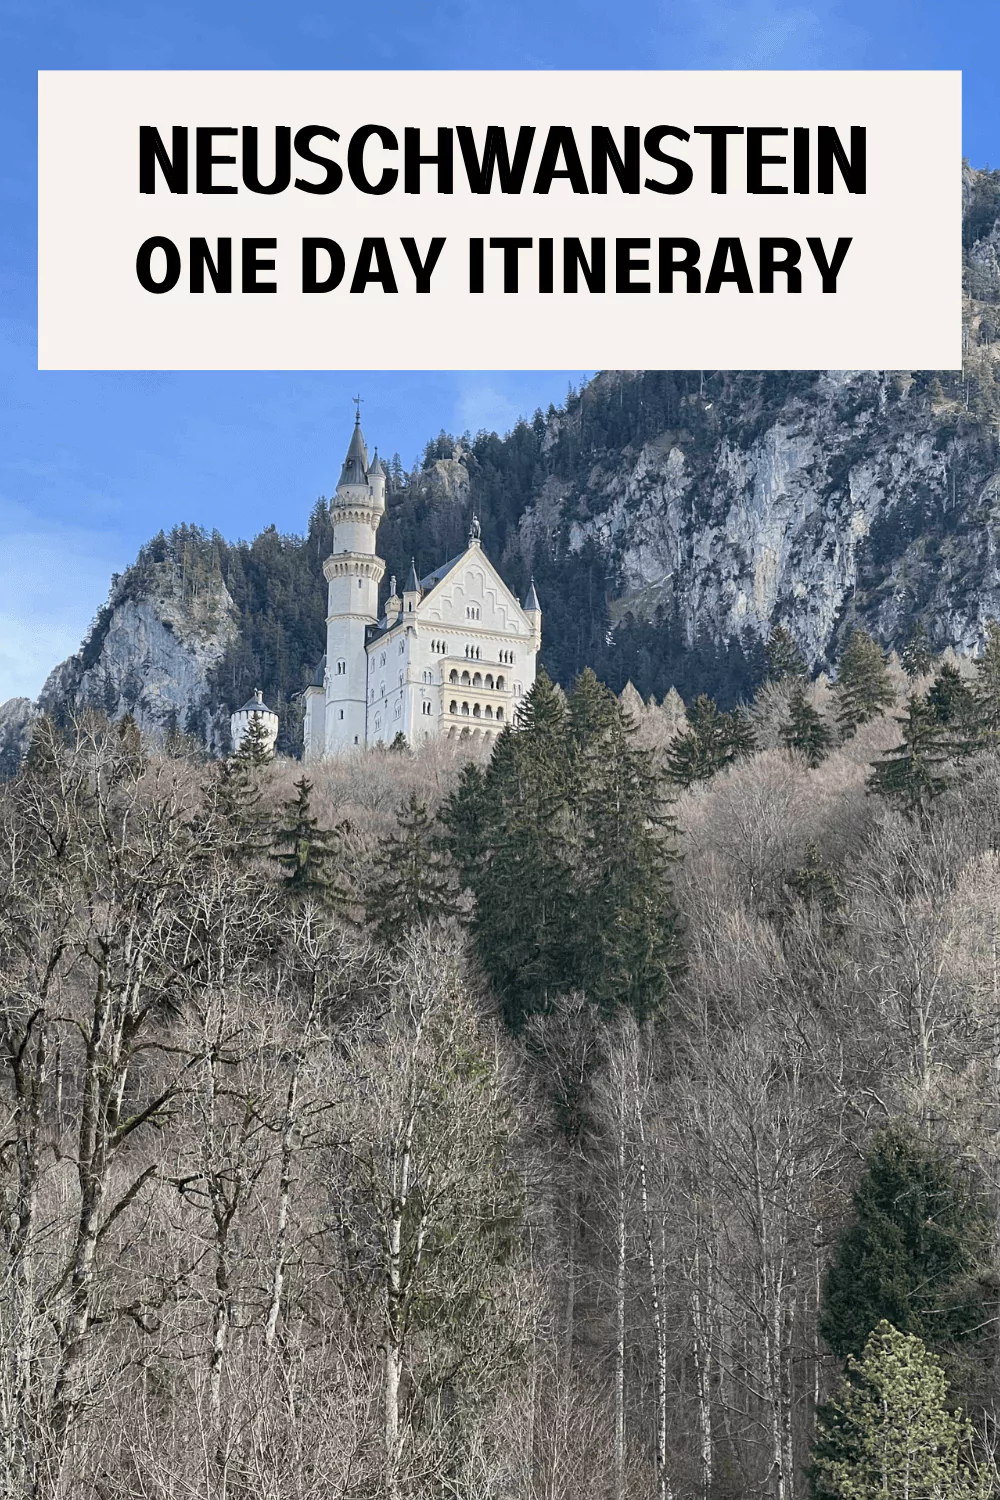 How To See Neuschwanstein Castle In One Day From Munich: The Ultimate Guide